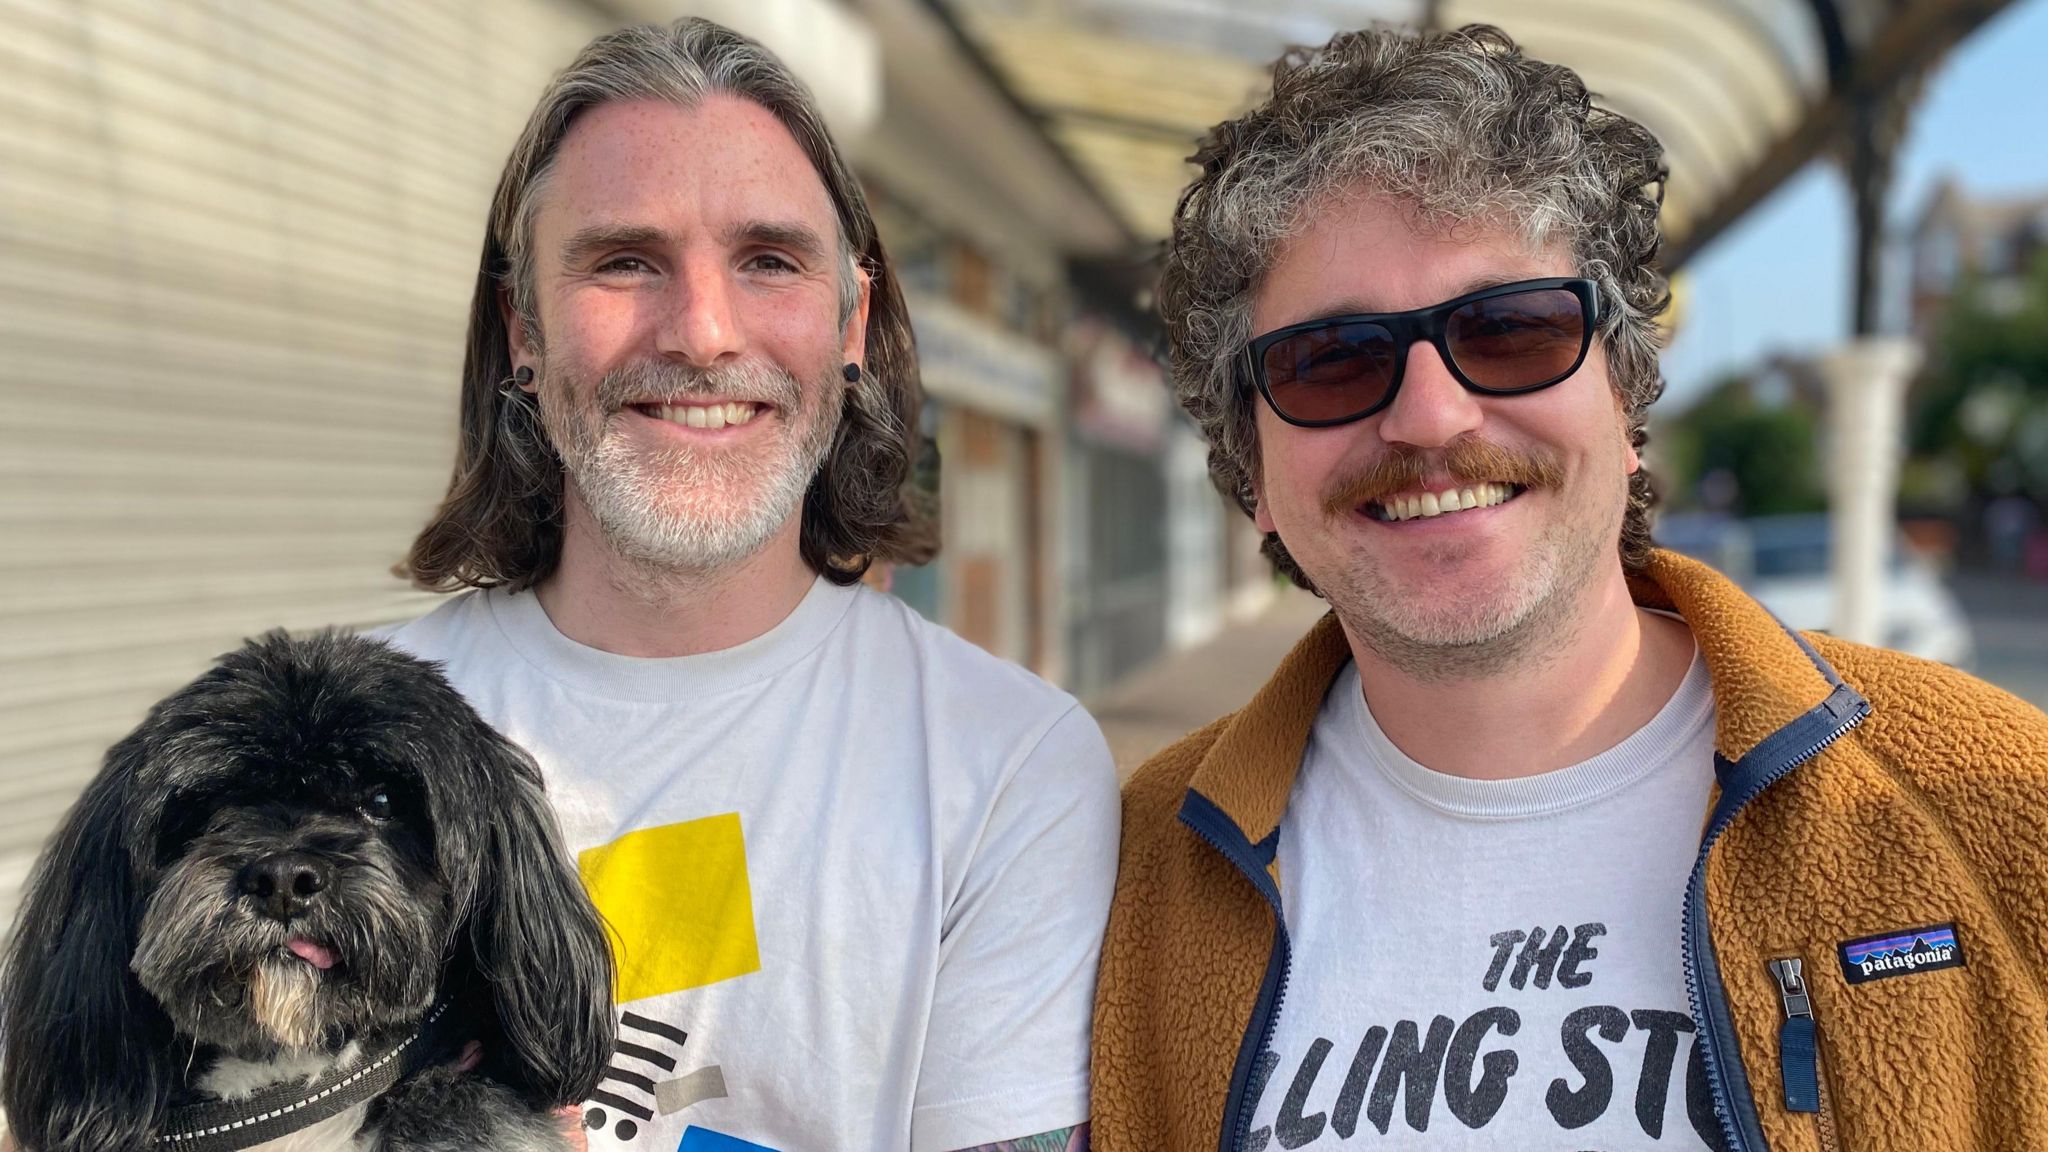 A smiling Steve Smith, with shoulder-length greying hair and a close-cut beard, wearing a white t-shirt with a yellow block design and carrying a small black and grey-haired dog, and a smiling Paul Smith, with curly greying hair, a brown moustache, stubble and sunglasses, wearing a white T-shirt bearing the words 'The Rolling Stones' under a brown fleece jacket, stand in front of a yellowing covered walkway alongside shops, some of which have shutters down